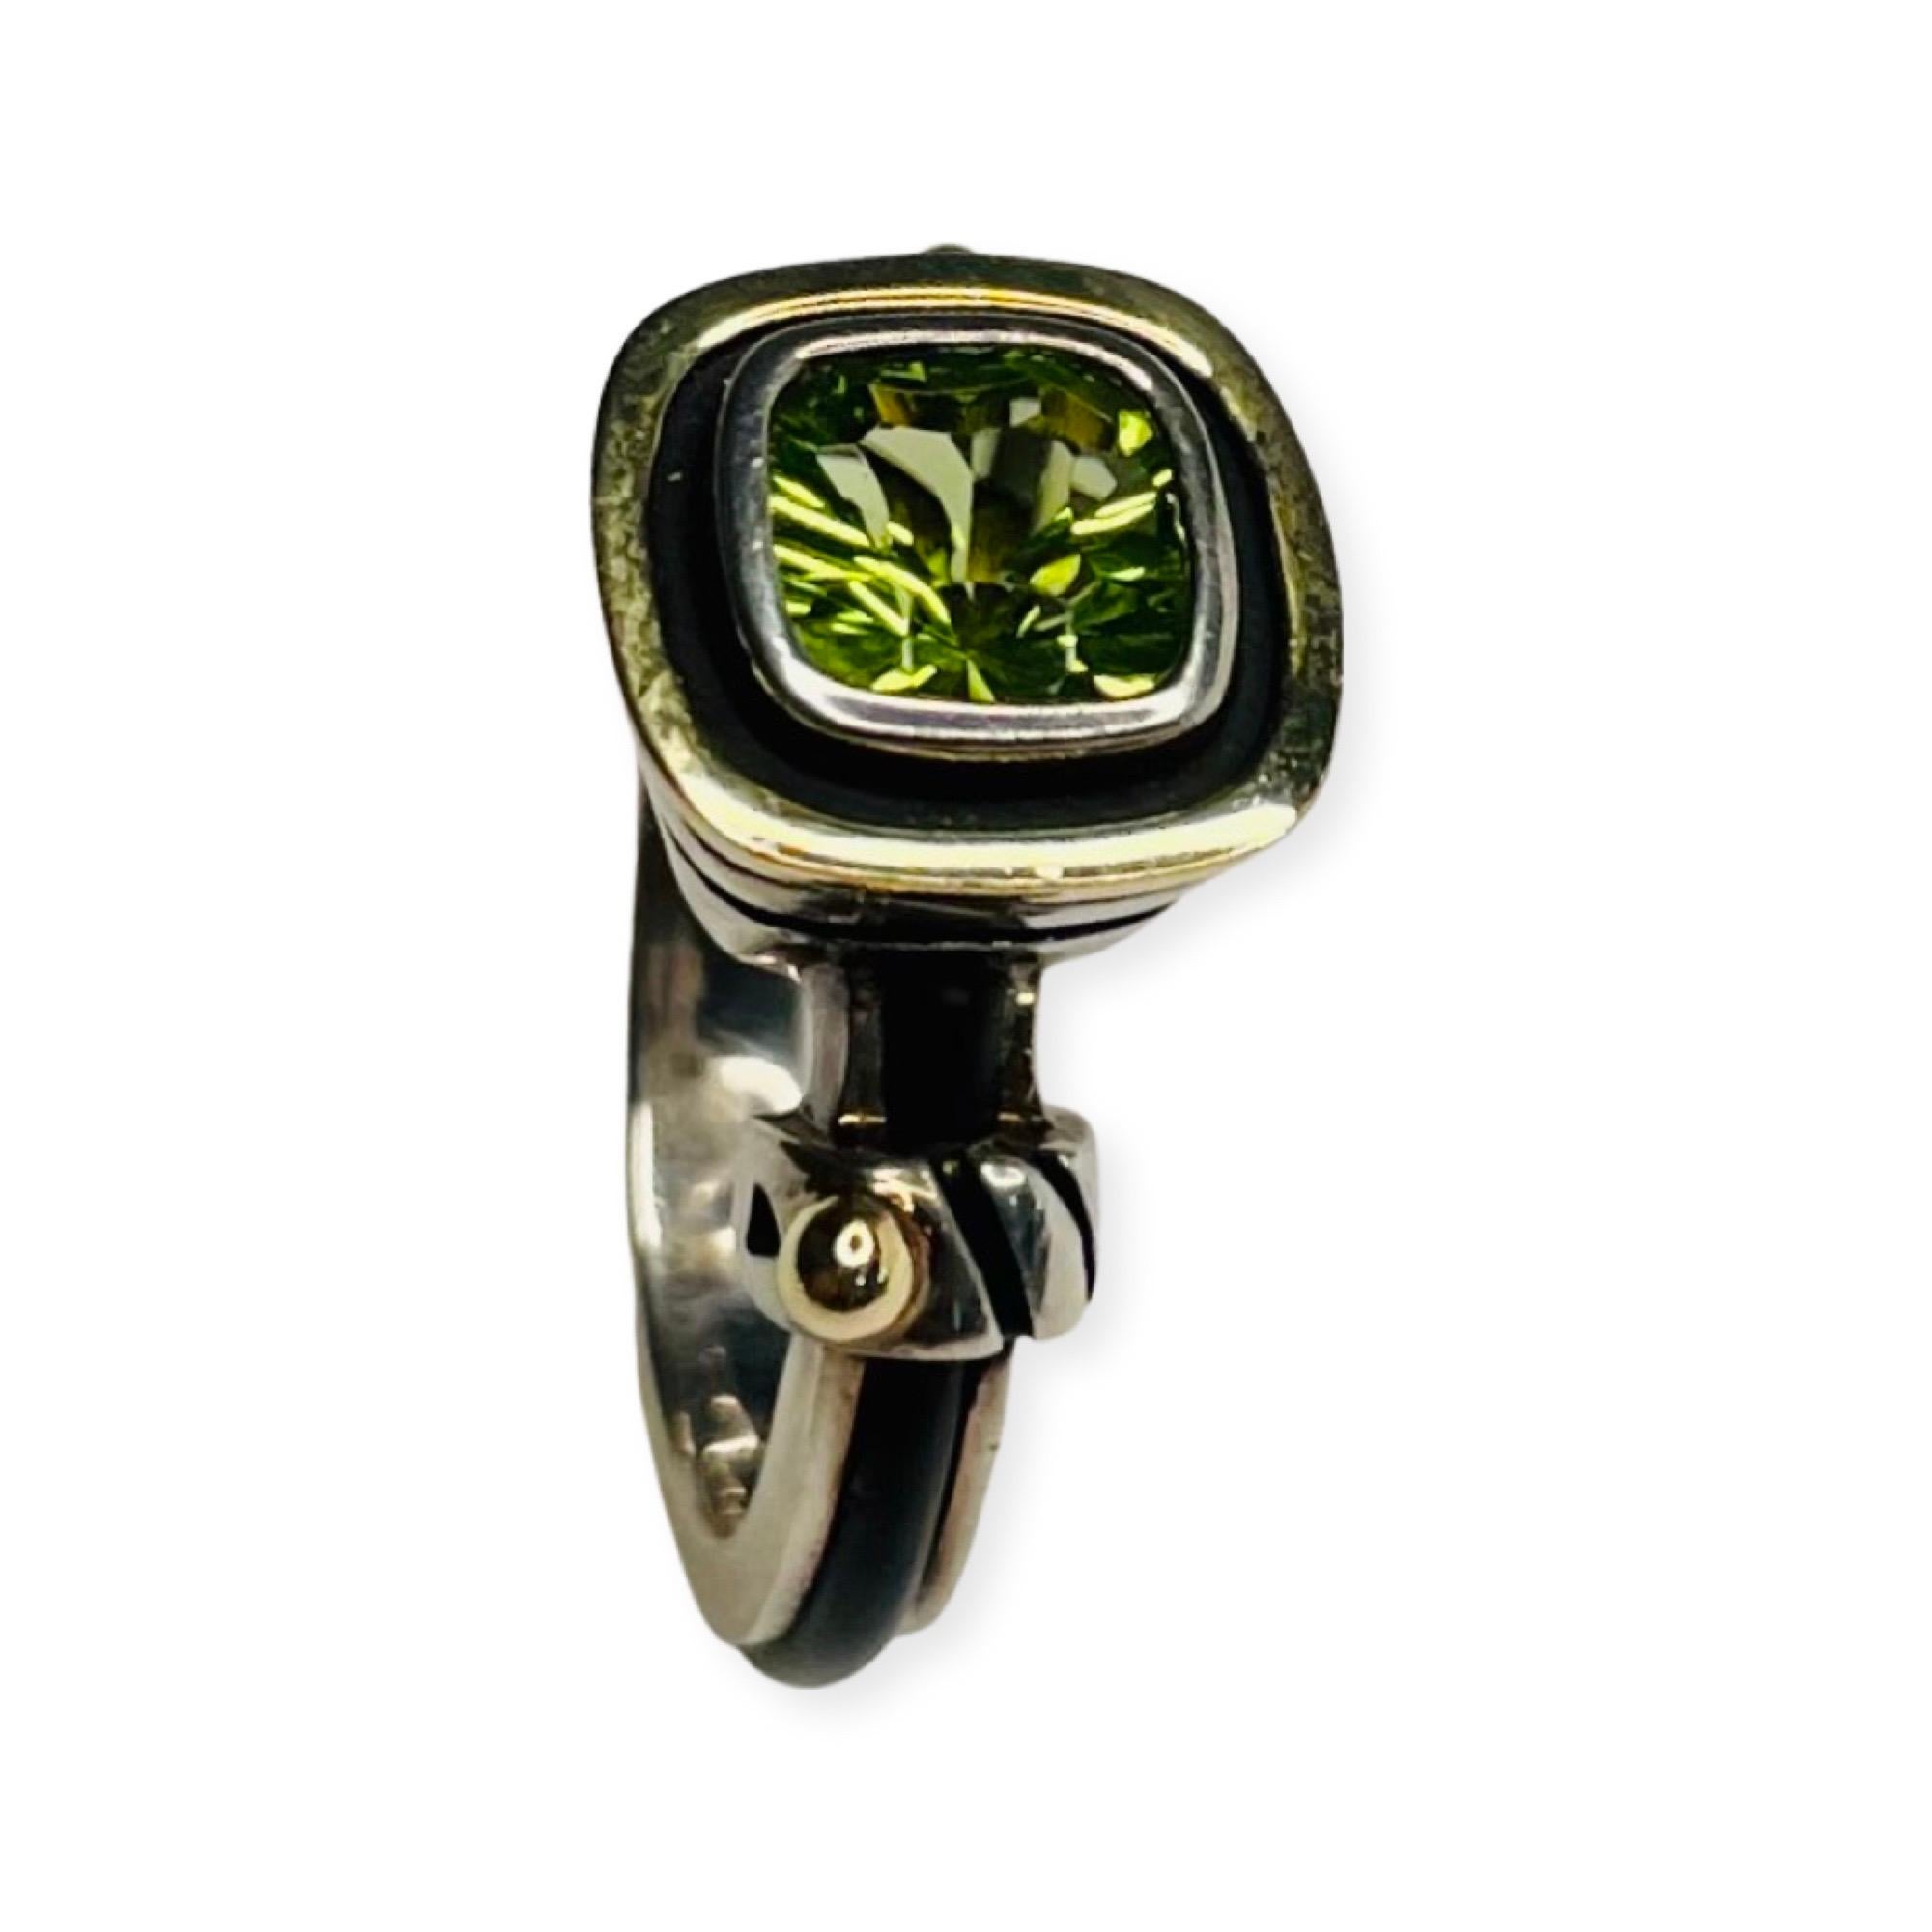 John Atencio 18KY gold and Sterling Silver Peridot Ring. The Hallmarks are 18K and 925. The trademark is JA. The peridot measures 11.0 mm and is set in an 18K yellow gold bezel. The ring is size 6.25.  It can be sized for an additional fee. There is